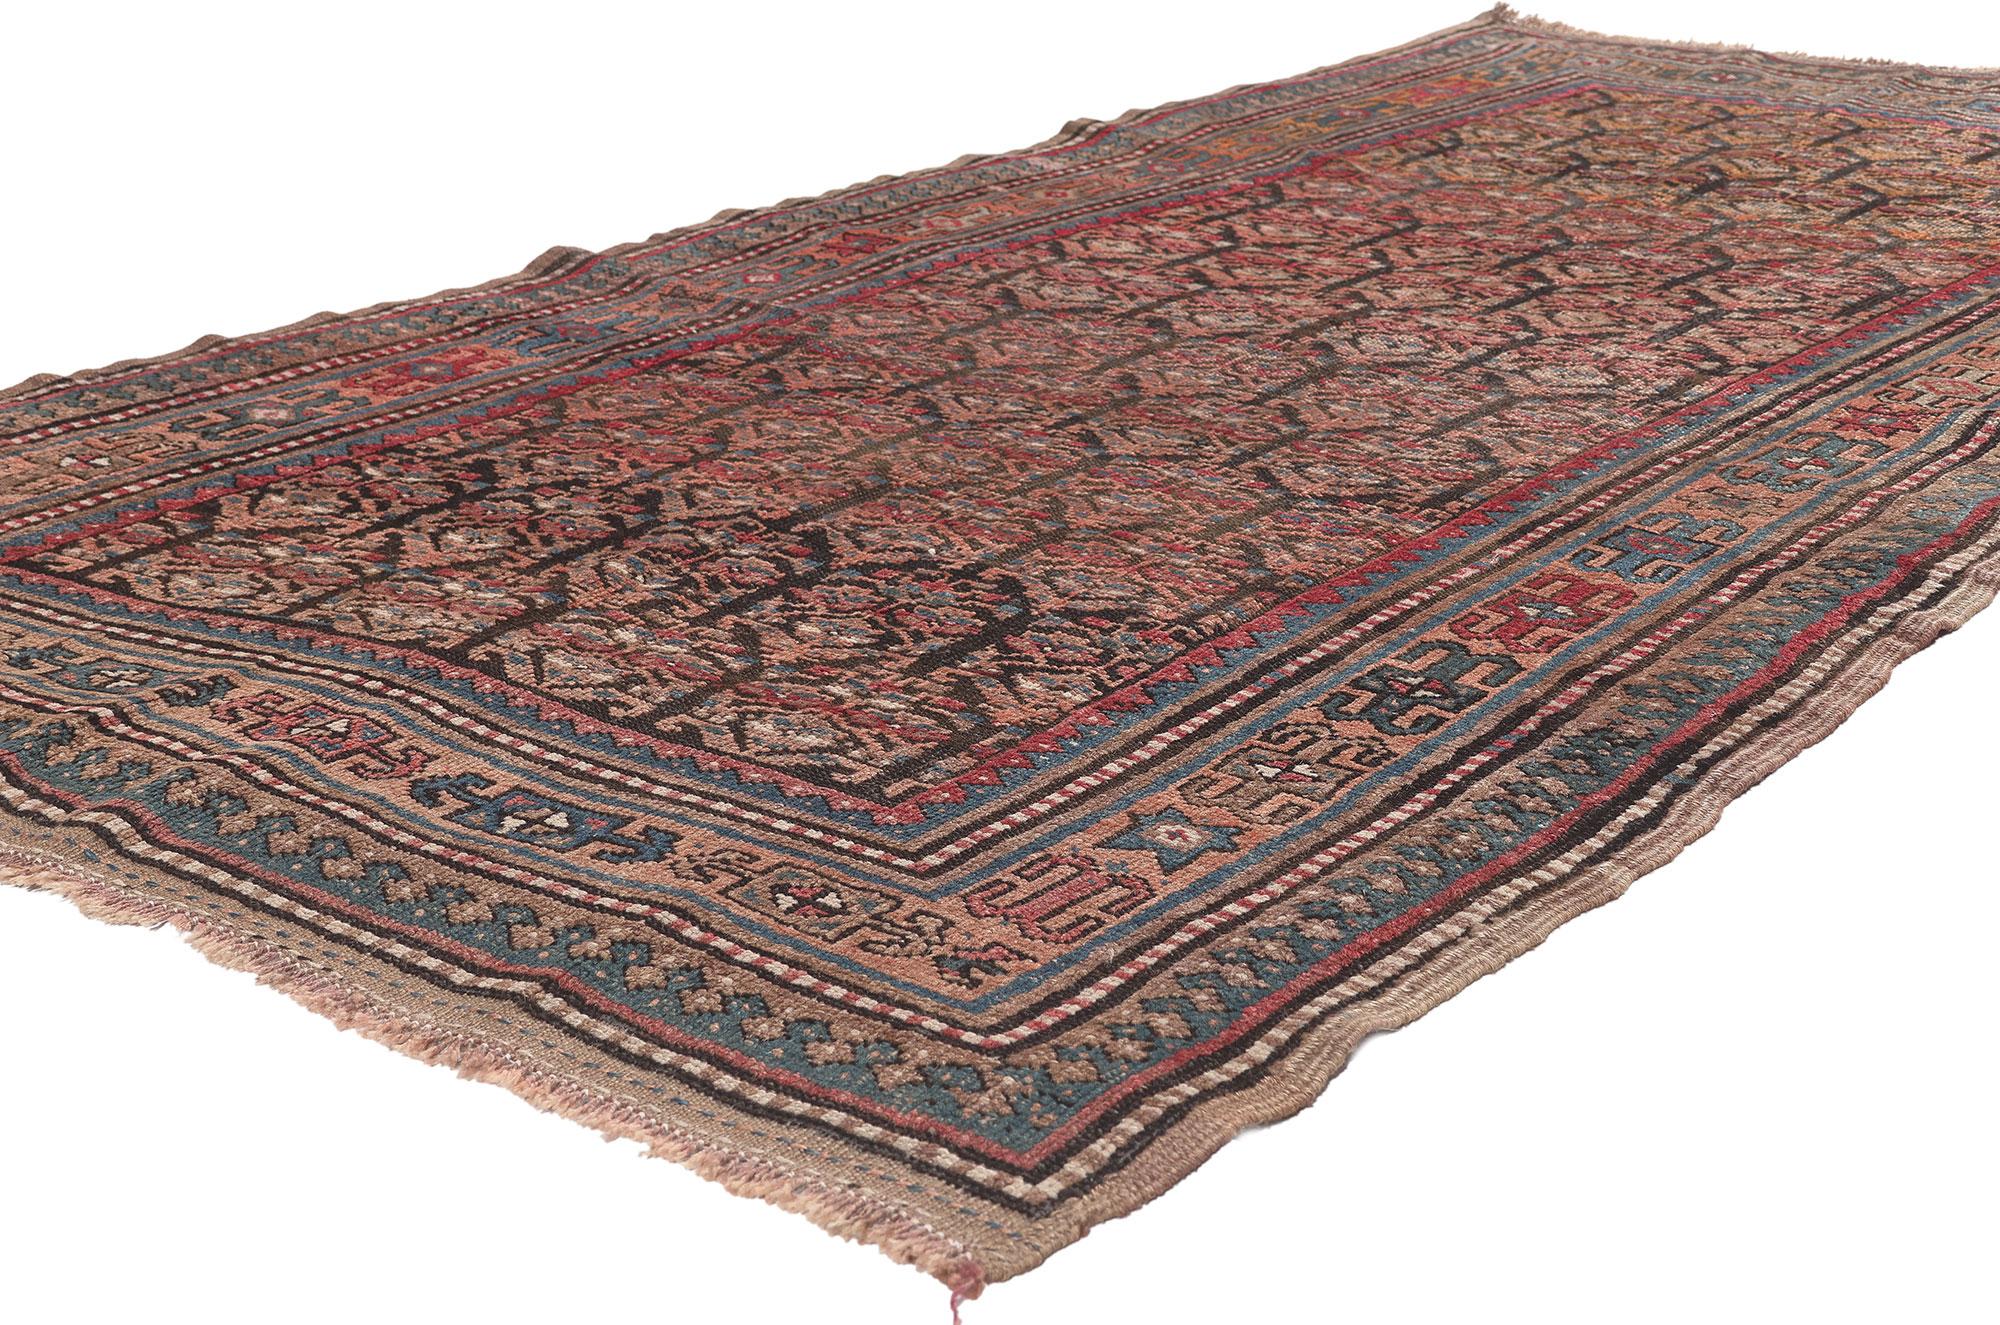 73113 Antique Persian Kurdish Rug 04’03 x 08’00.
Rugged beauty meets laid-back luxury in this antique Persian Kurdish rug. The decorative boteh design and lively earth-tone colors woven into this piece work together creating a deeply appealing look